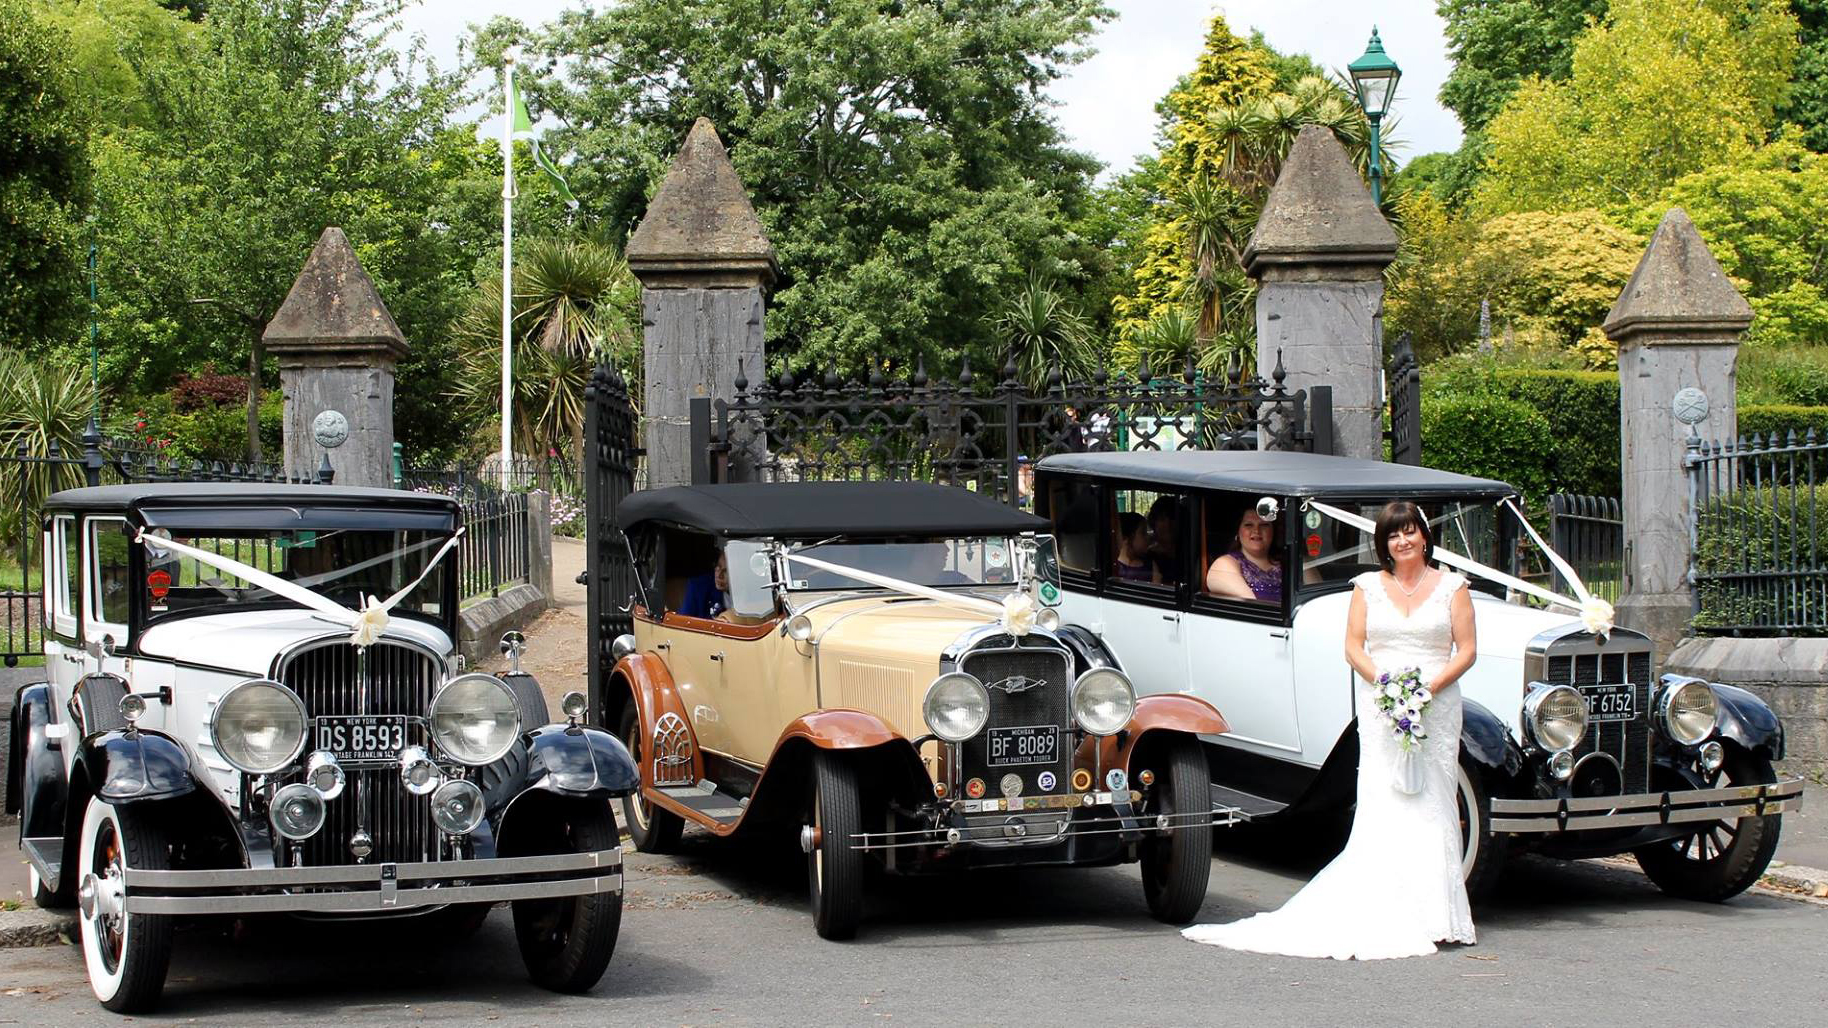 Three vintage wedding cars decorated with white ribbons at a local Plymouth wedding. All three vehicles are parked side-by-side with bride wearing a white dress holding a bridal bo